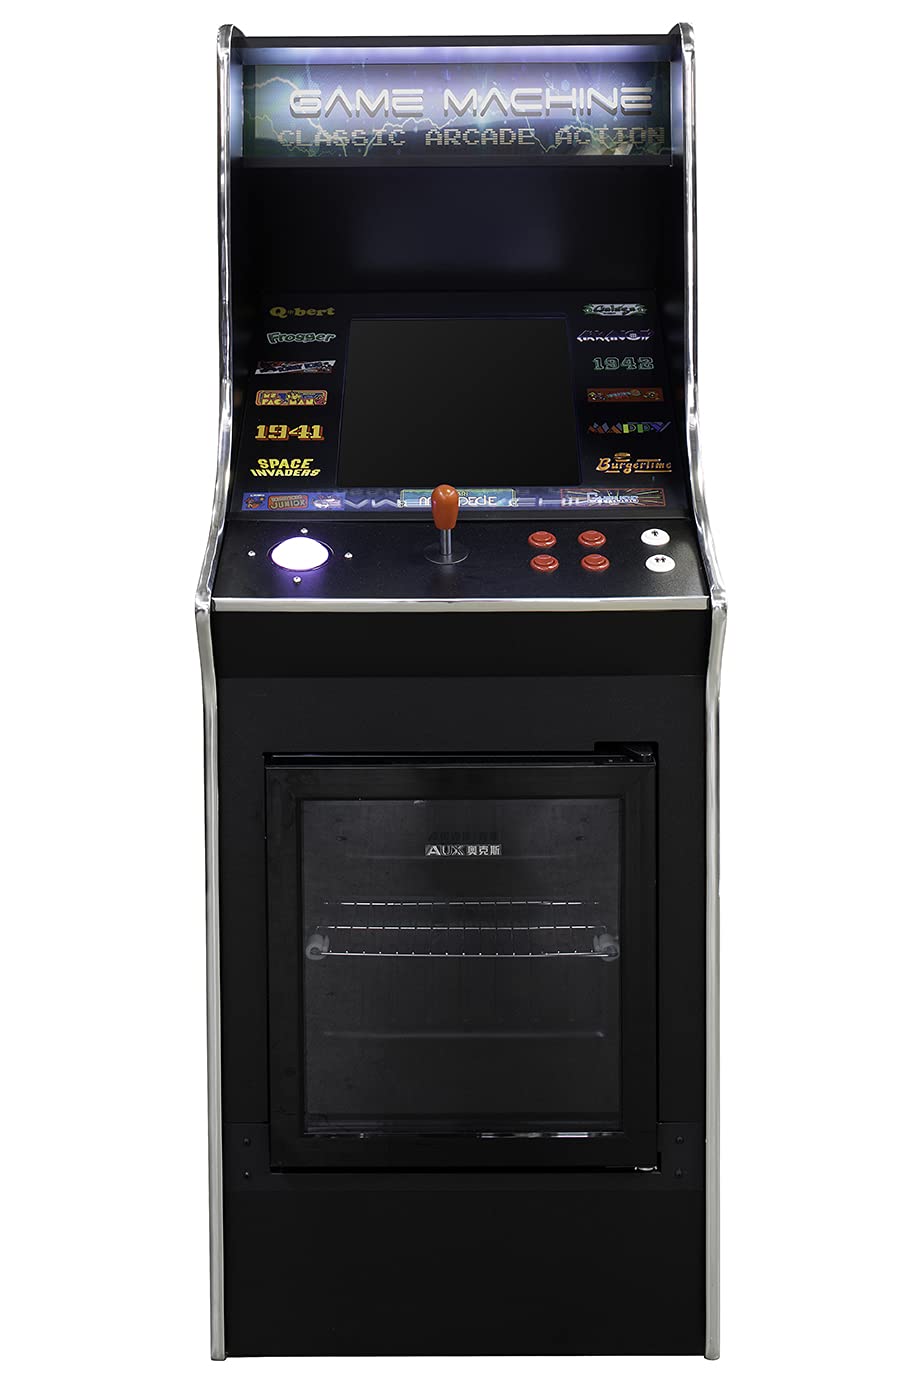 Full-Size Commercial Grade Cabinet Arcade Machine with Built-in Refrigerator - Trackball - Joystick - 516 Classic Games - 19